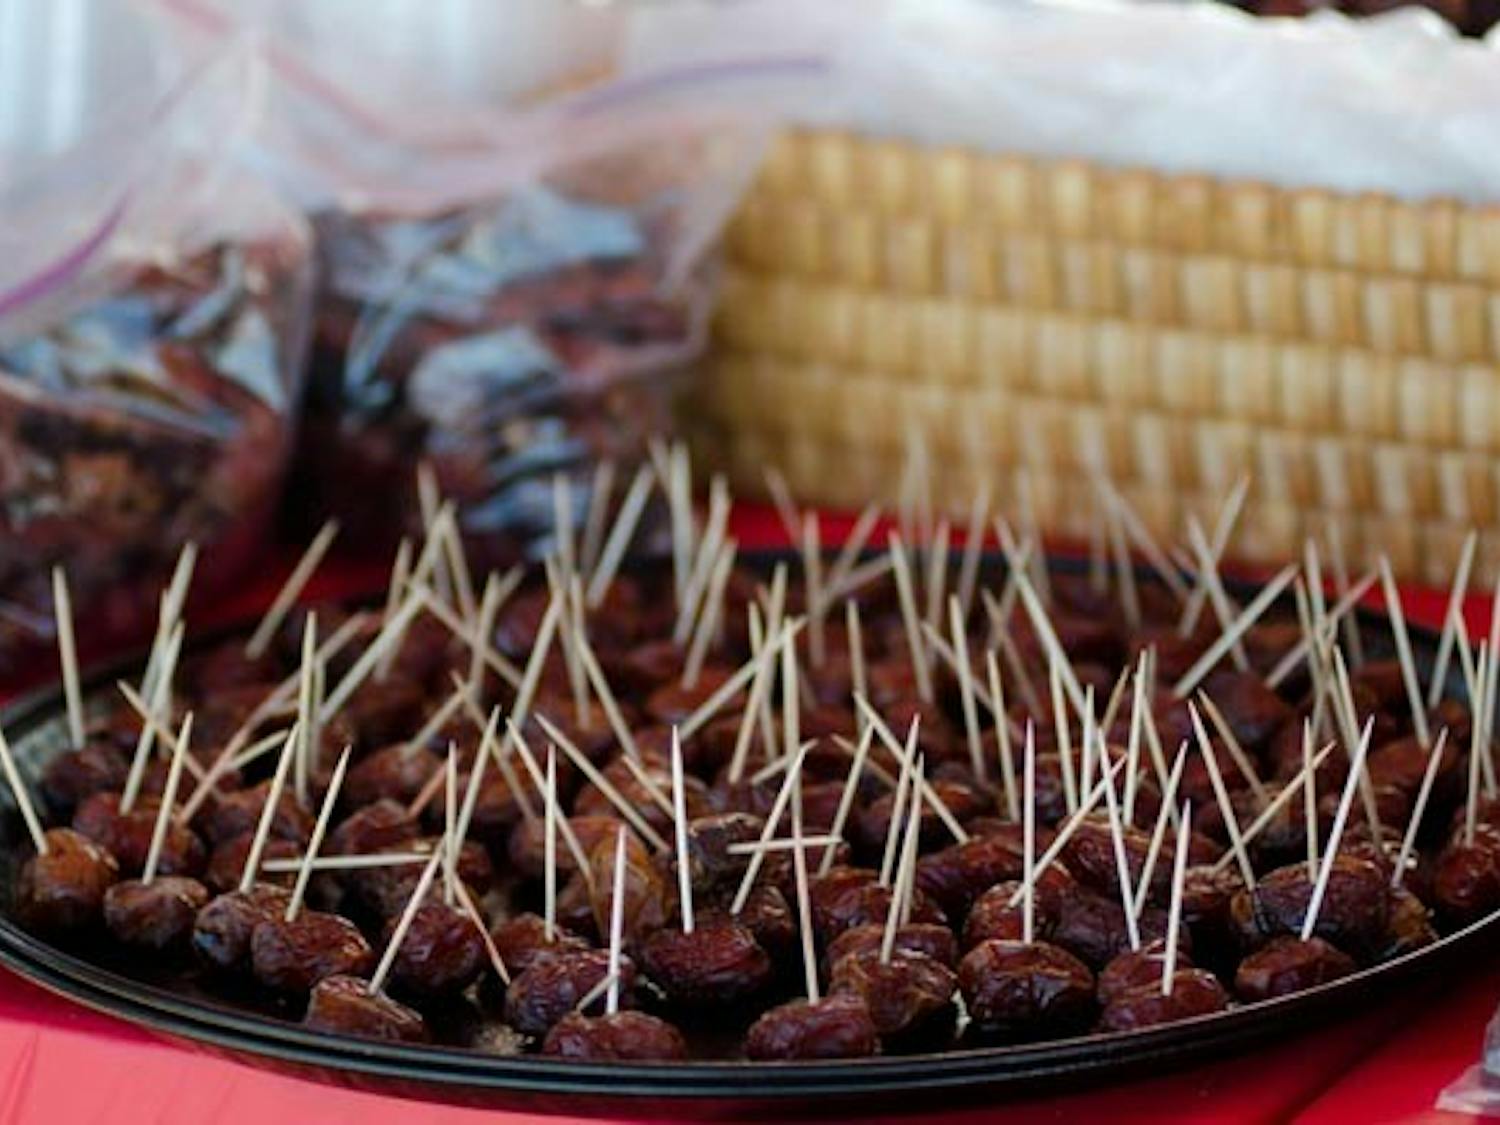 'NATURE'S CANDY': The Inaugural Date Festival was held Saturday by The Arboretum at ASU on the Polytechnic campus. At the festival, people were able to taste and purchase over 20 different varieties of dates. (Photo by Aaron Lavinsky)